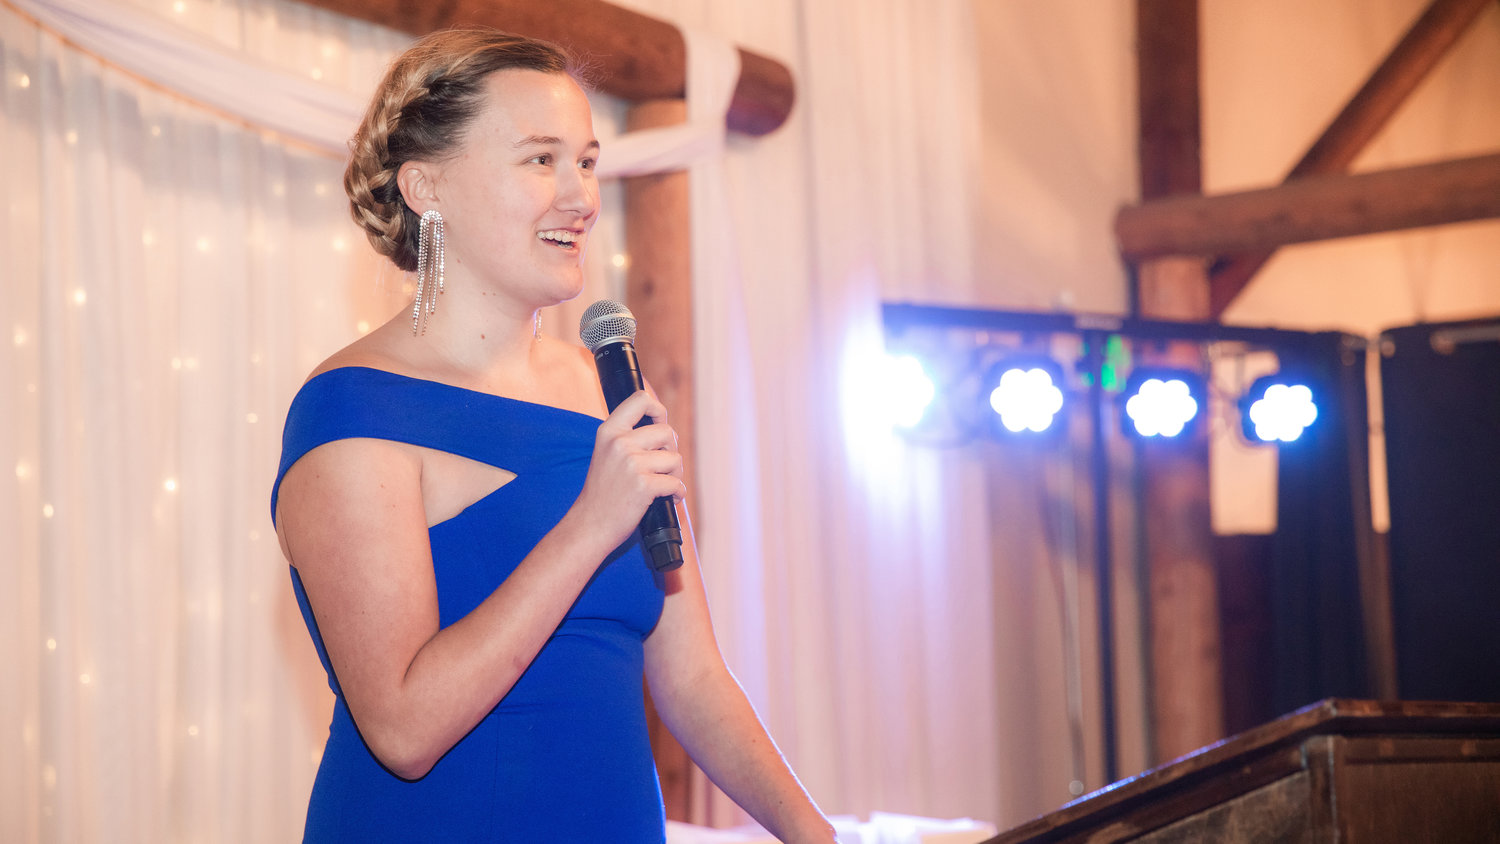 The Yelm Chamber of Commerce introduced Madison Kahoons as the new executive director during the Best of Nisqually Gala in Roy on Thursday.